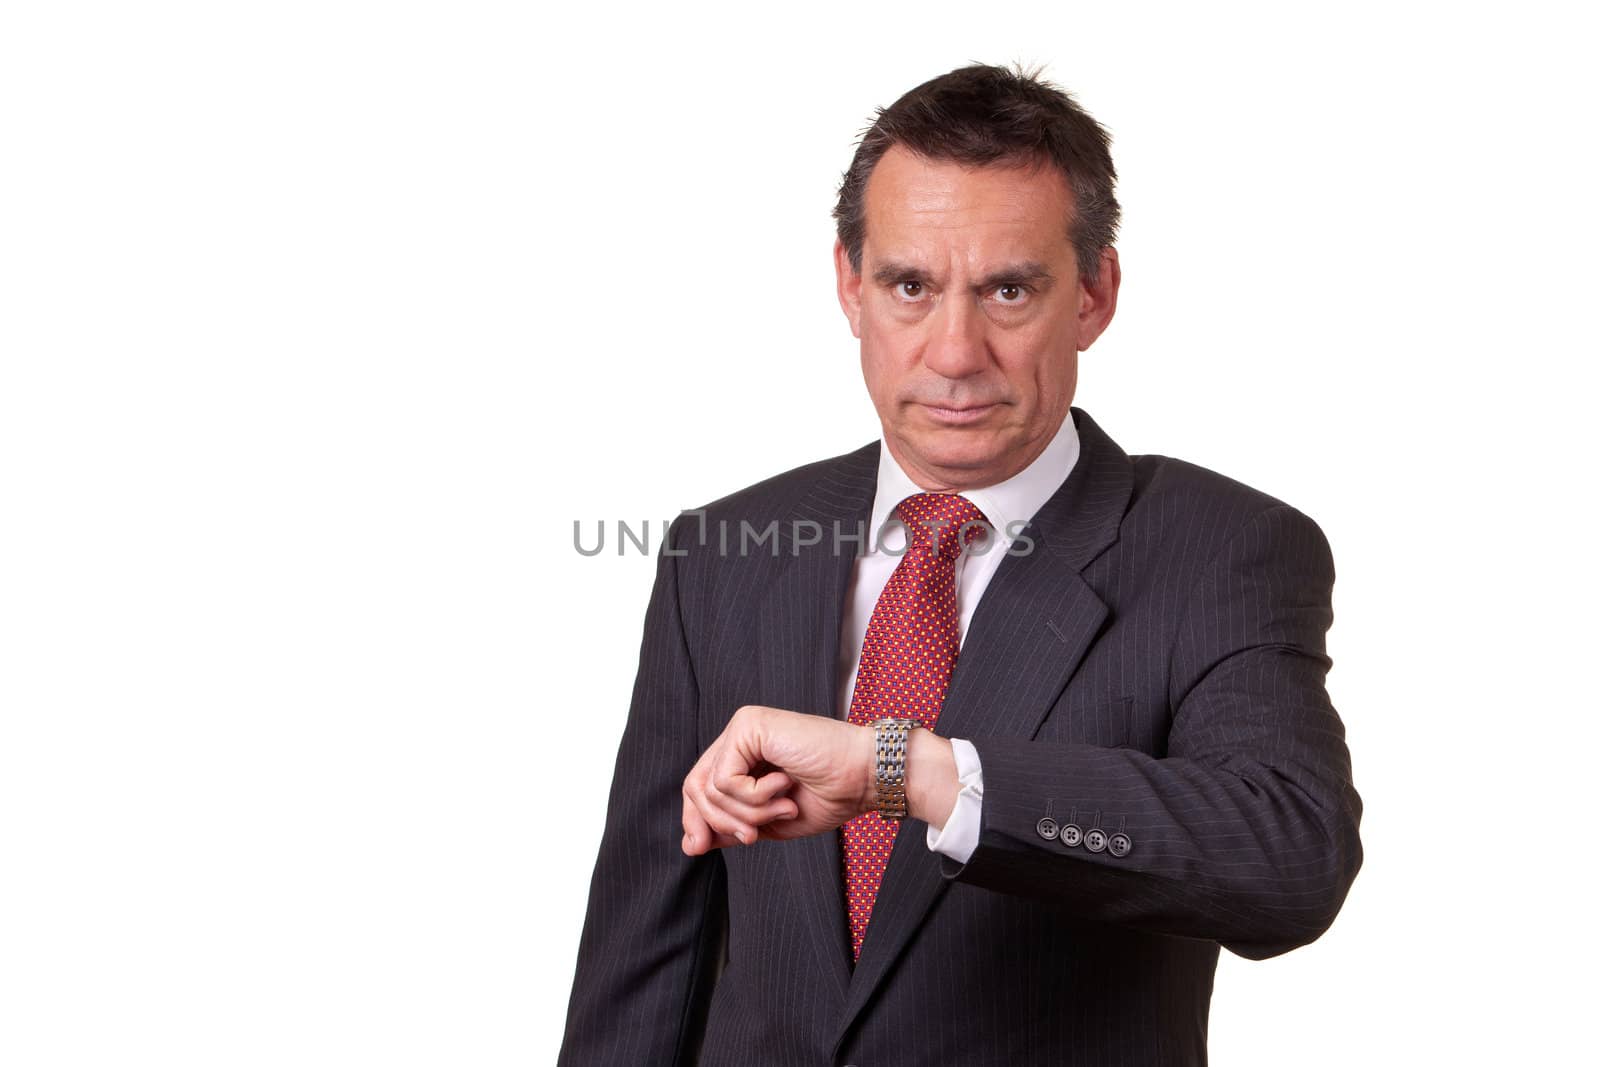 Frowning Angry Middle Age Business Man in Suit Looking at Time on Watch Isolated